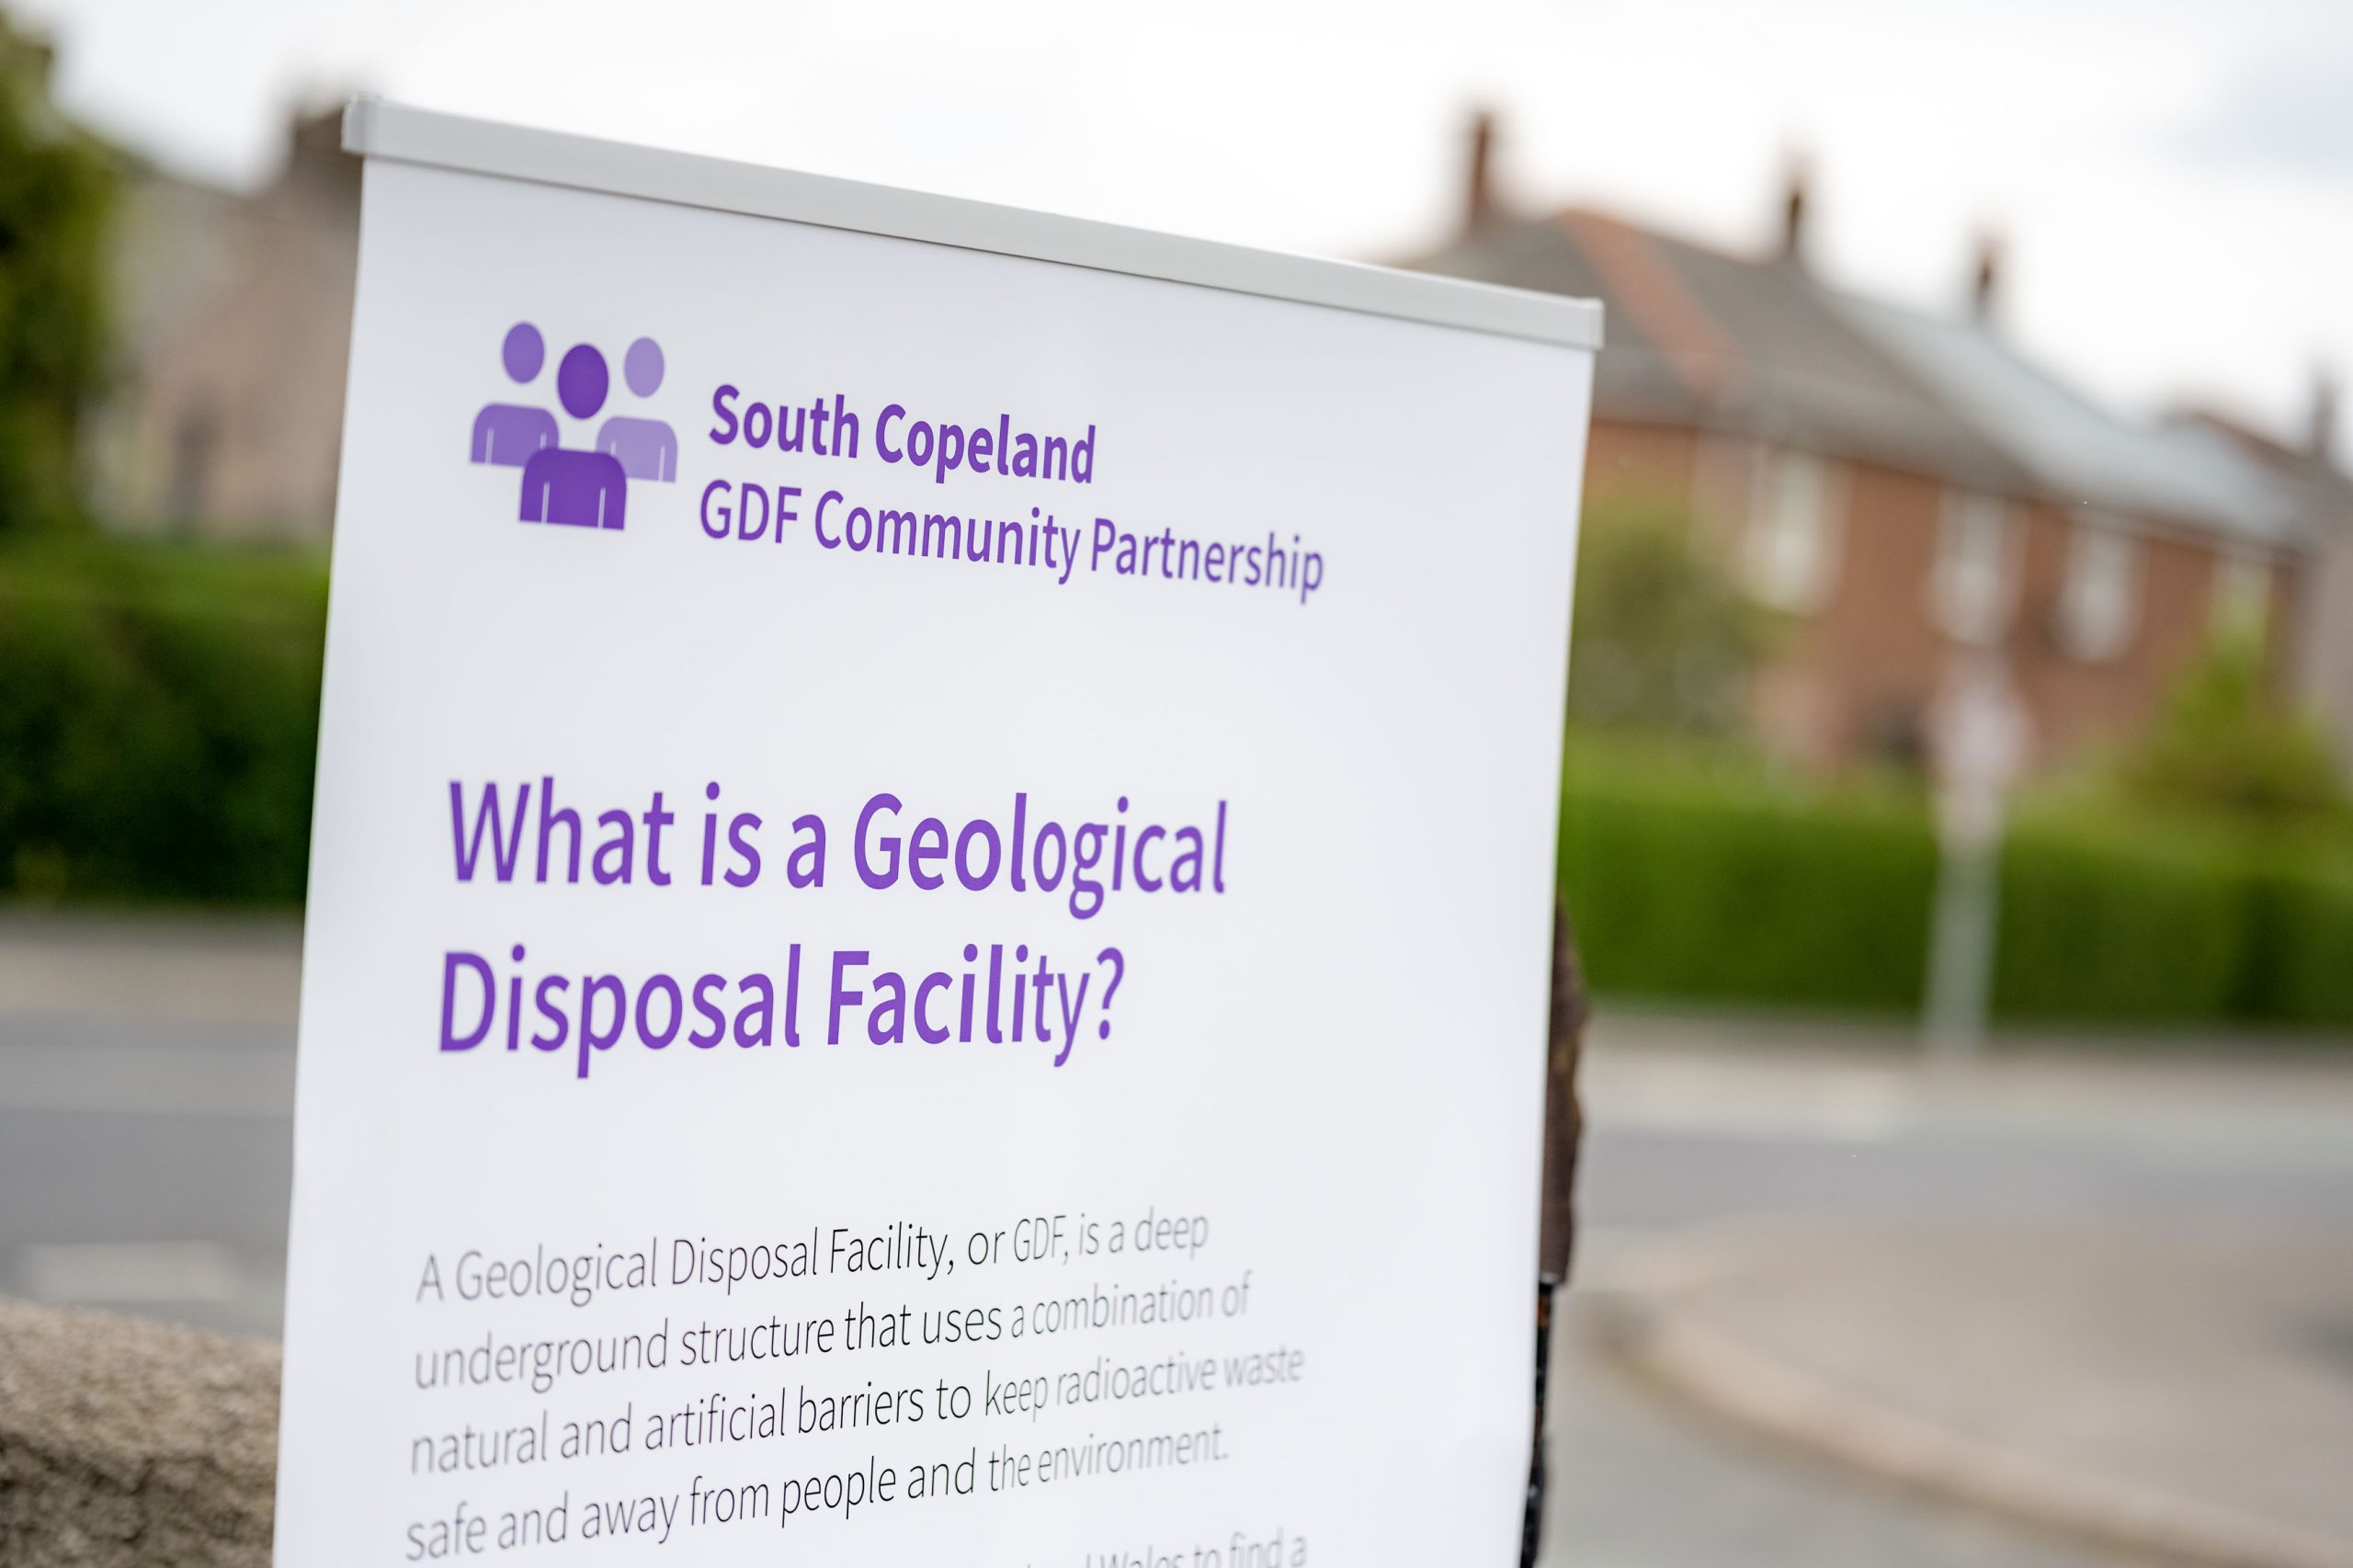 Find out more about geological disposal at upcoming events